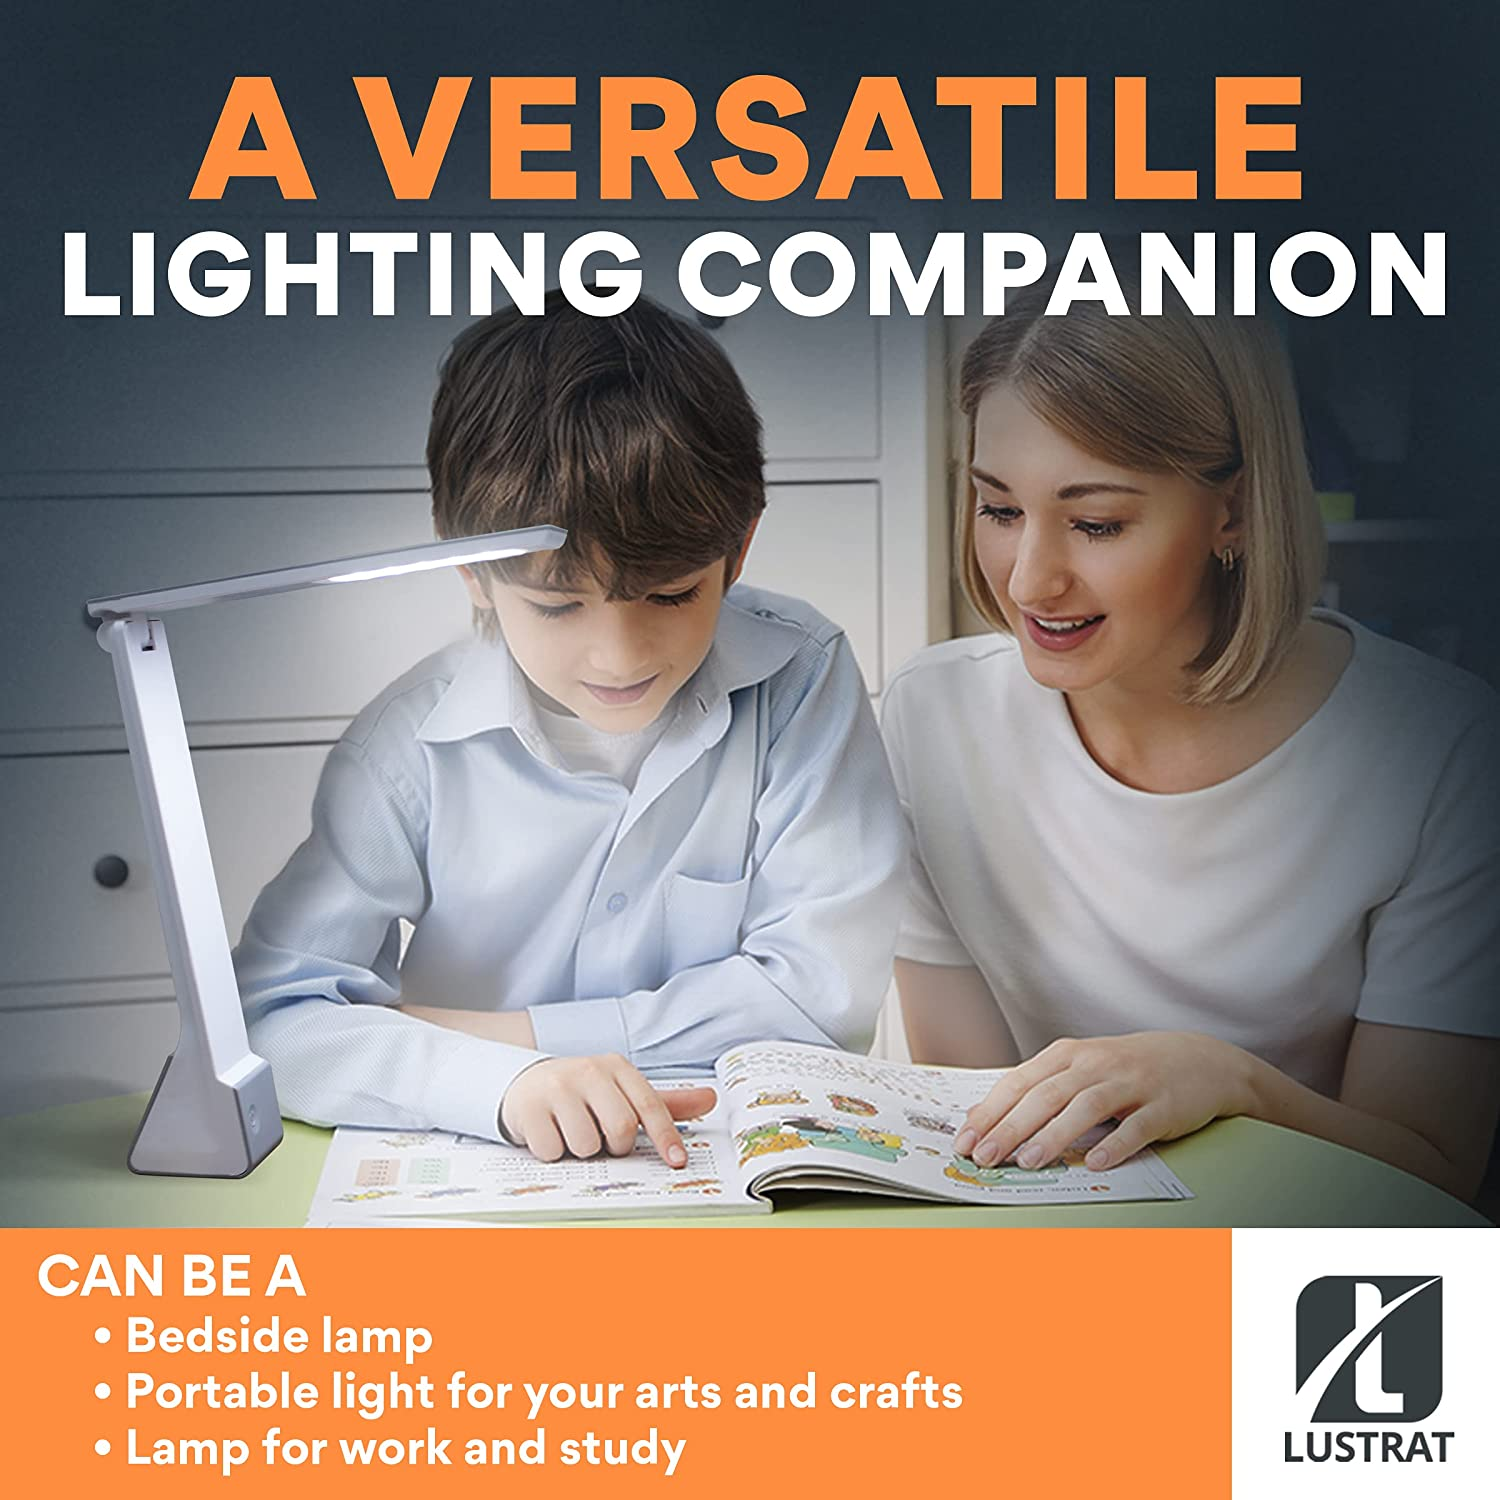 lustrat Portable LED Desk Lamp with Rechargeable Battery Travel Size 3 Lighting Choices (Read/Study/Relax) Durable 25 Year Life